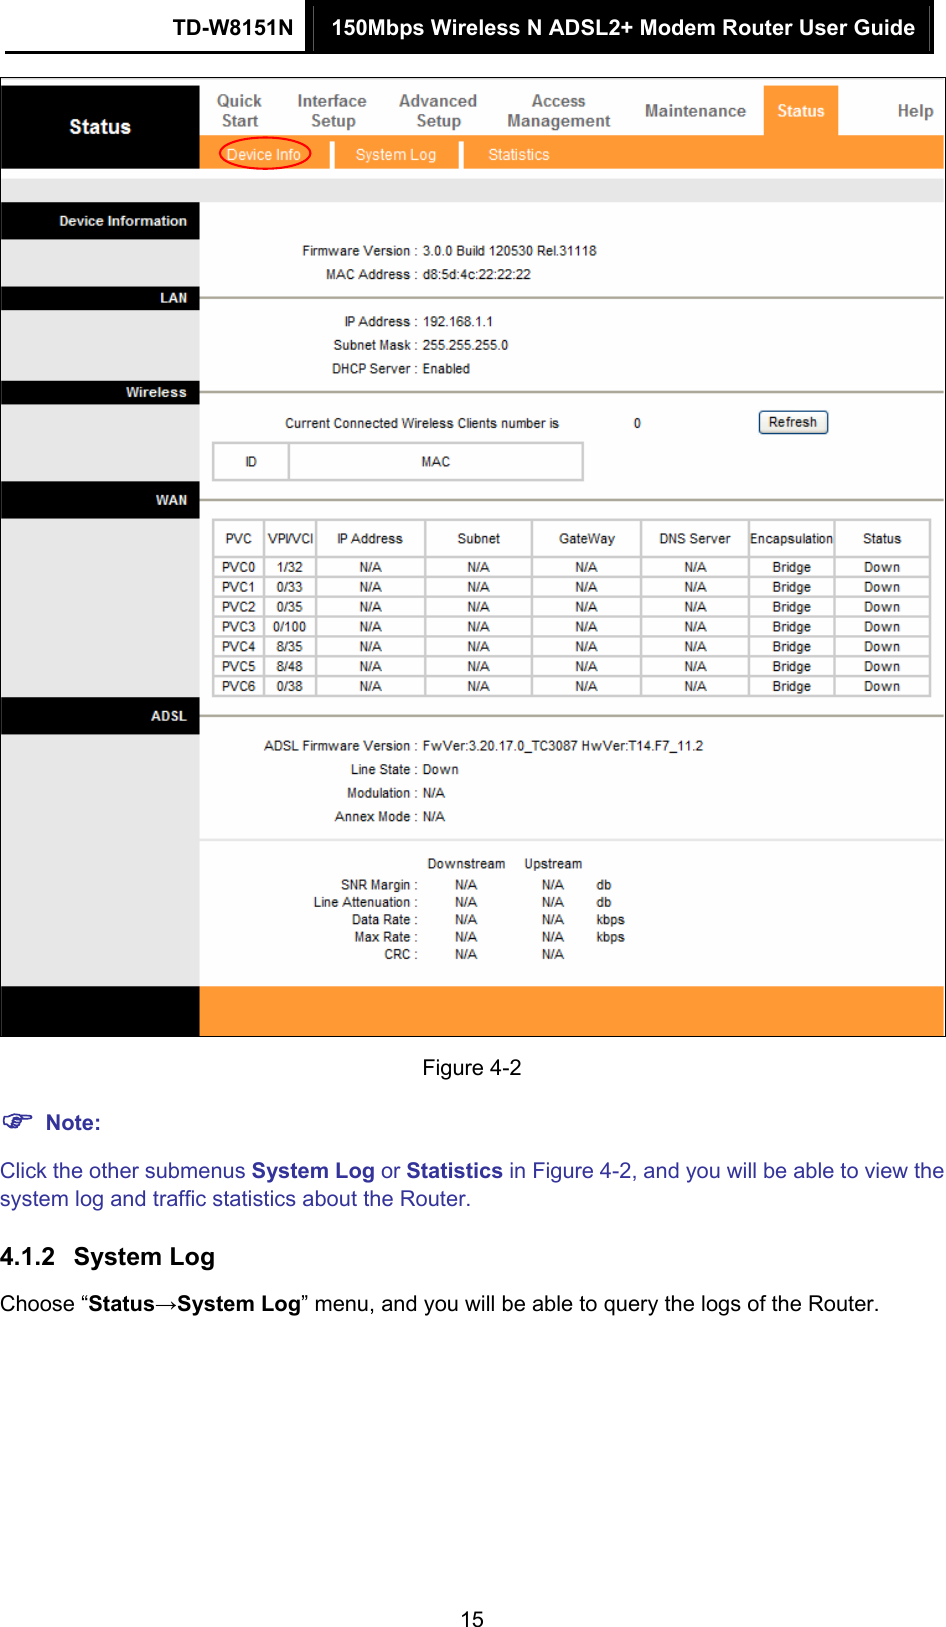 TD-W8151N  150Mbps Wireless N ADSL2+ Modem Router User Guide  15 Figure 4-2  Note: Click the other submenus System Log or Statistics in Figure 4-2, and you will be able to view the system log and traffic statistics about the Router. 4.1.2  System Log Choose “Status→System Log” menu, and you will be able to query the logs of the Router. 